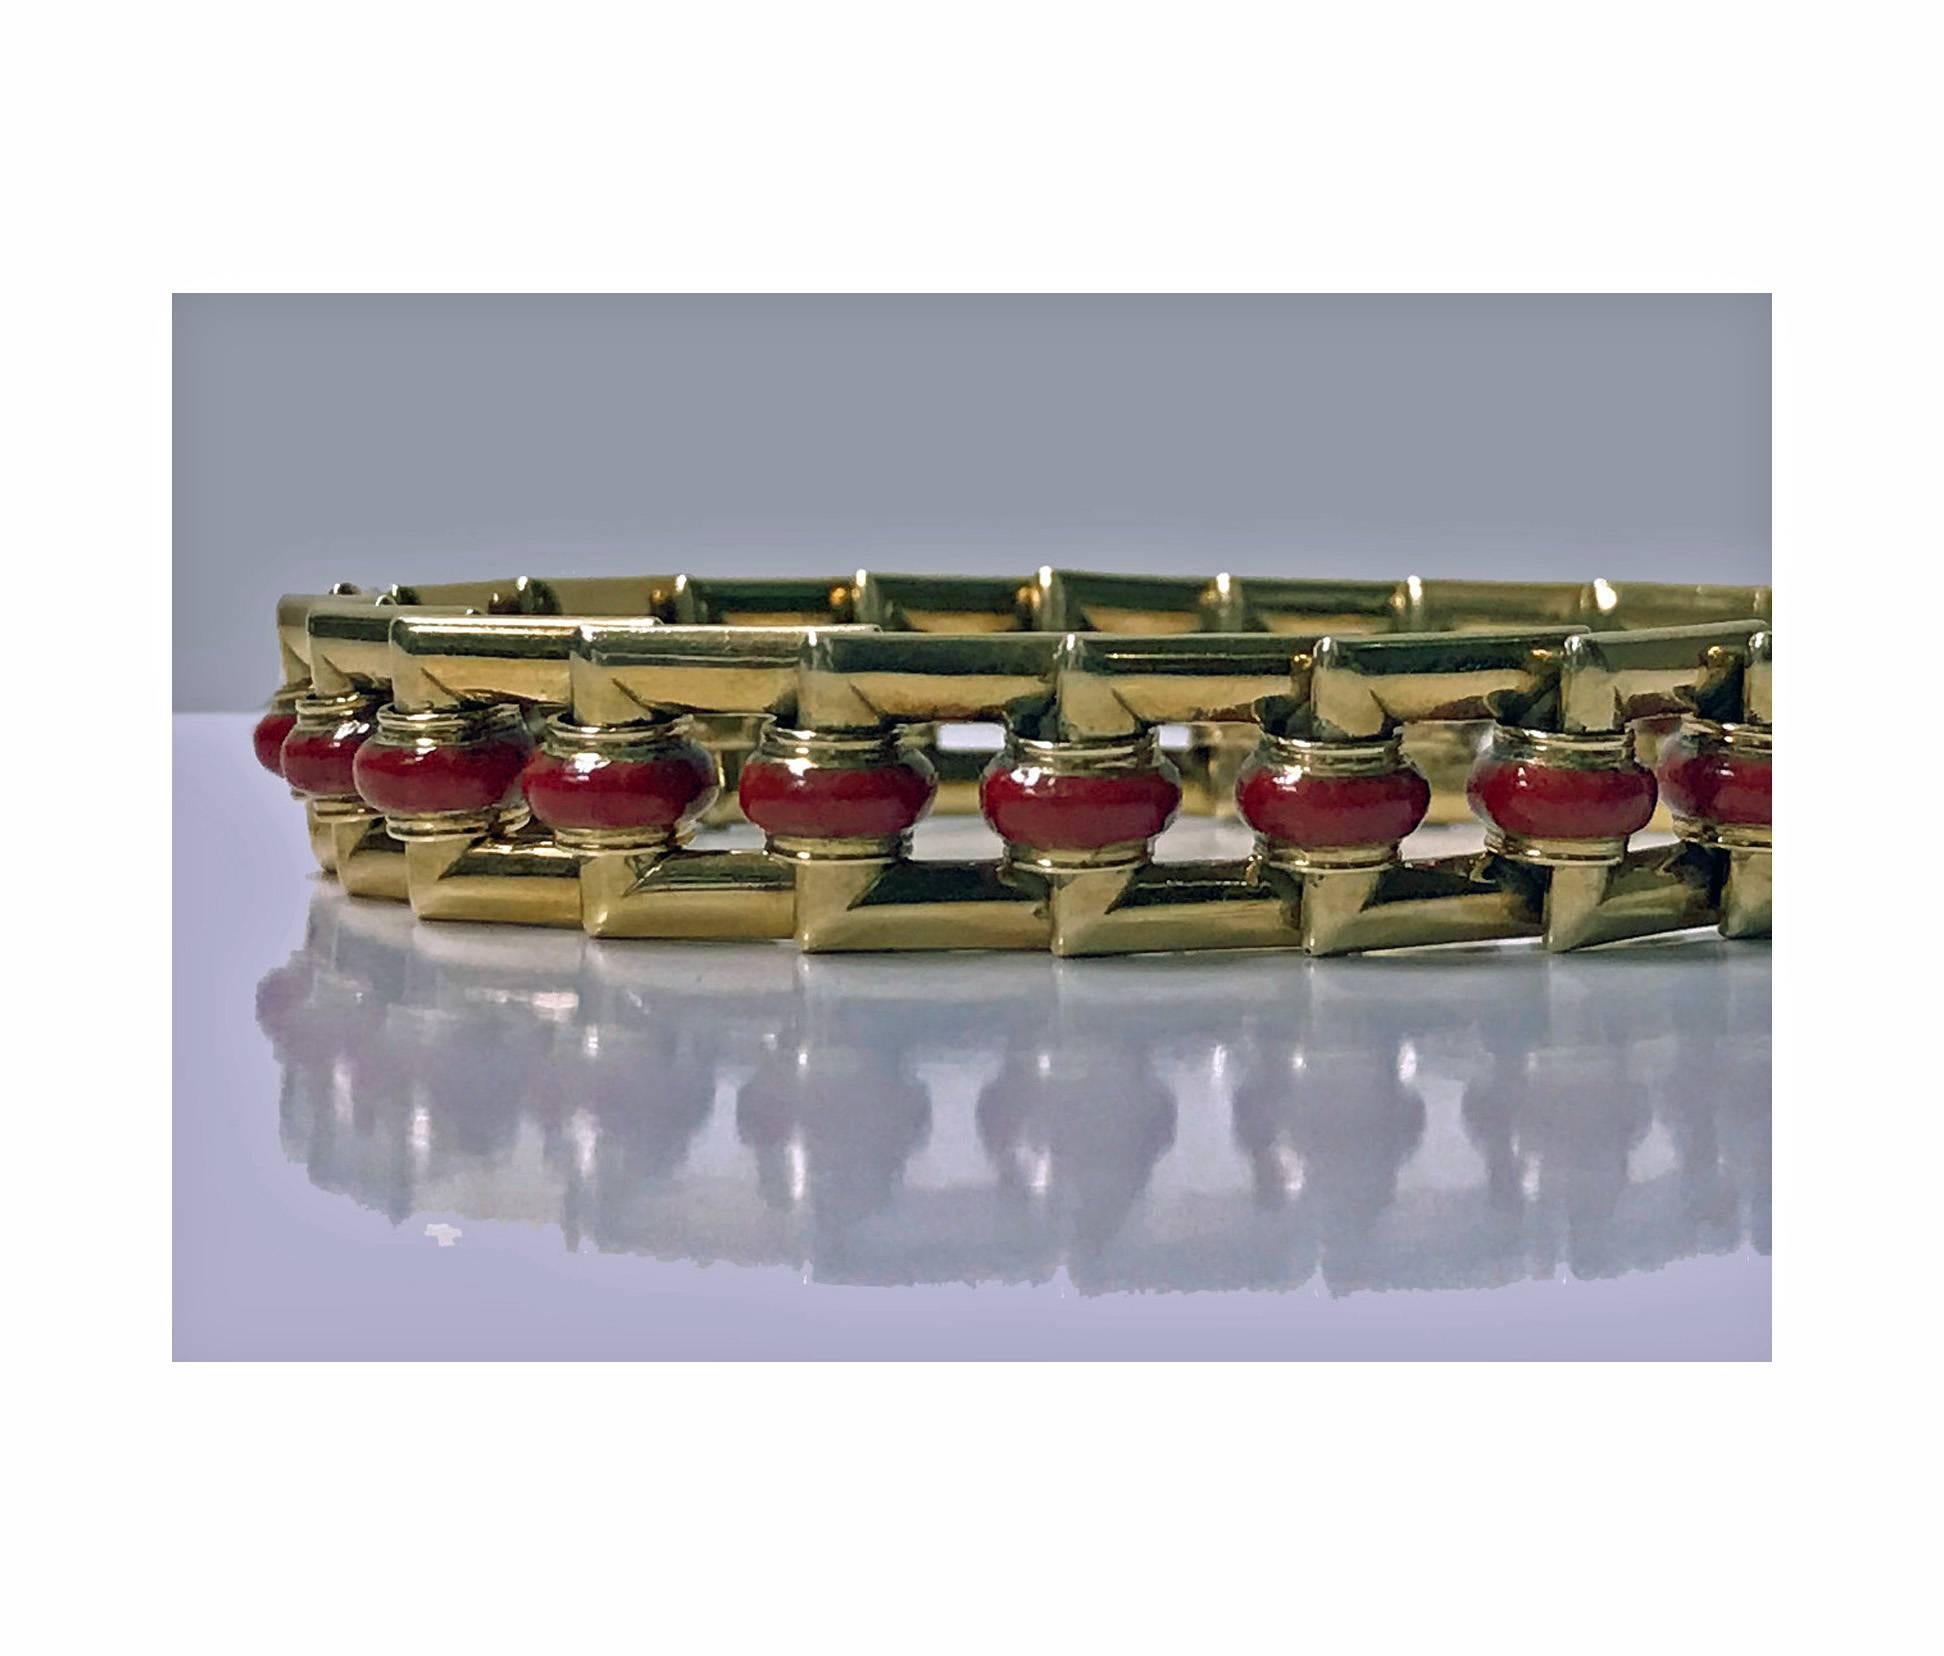 Art Deco 18K Carnelian Bracelet, C.1930. The Bracelet with overlapping open rectangular links each with orange red carnelian rondelle, terminating with tongue and box clasp fastener. Length: 7.25 inches. Item Weight: 40.32 grams.